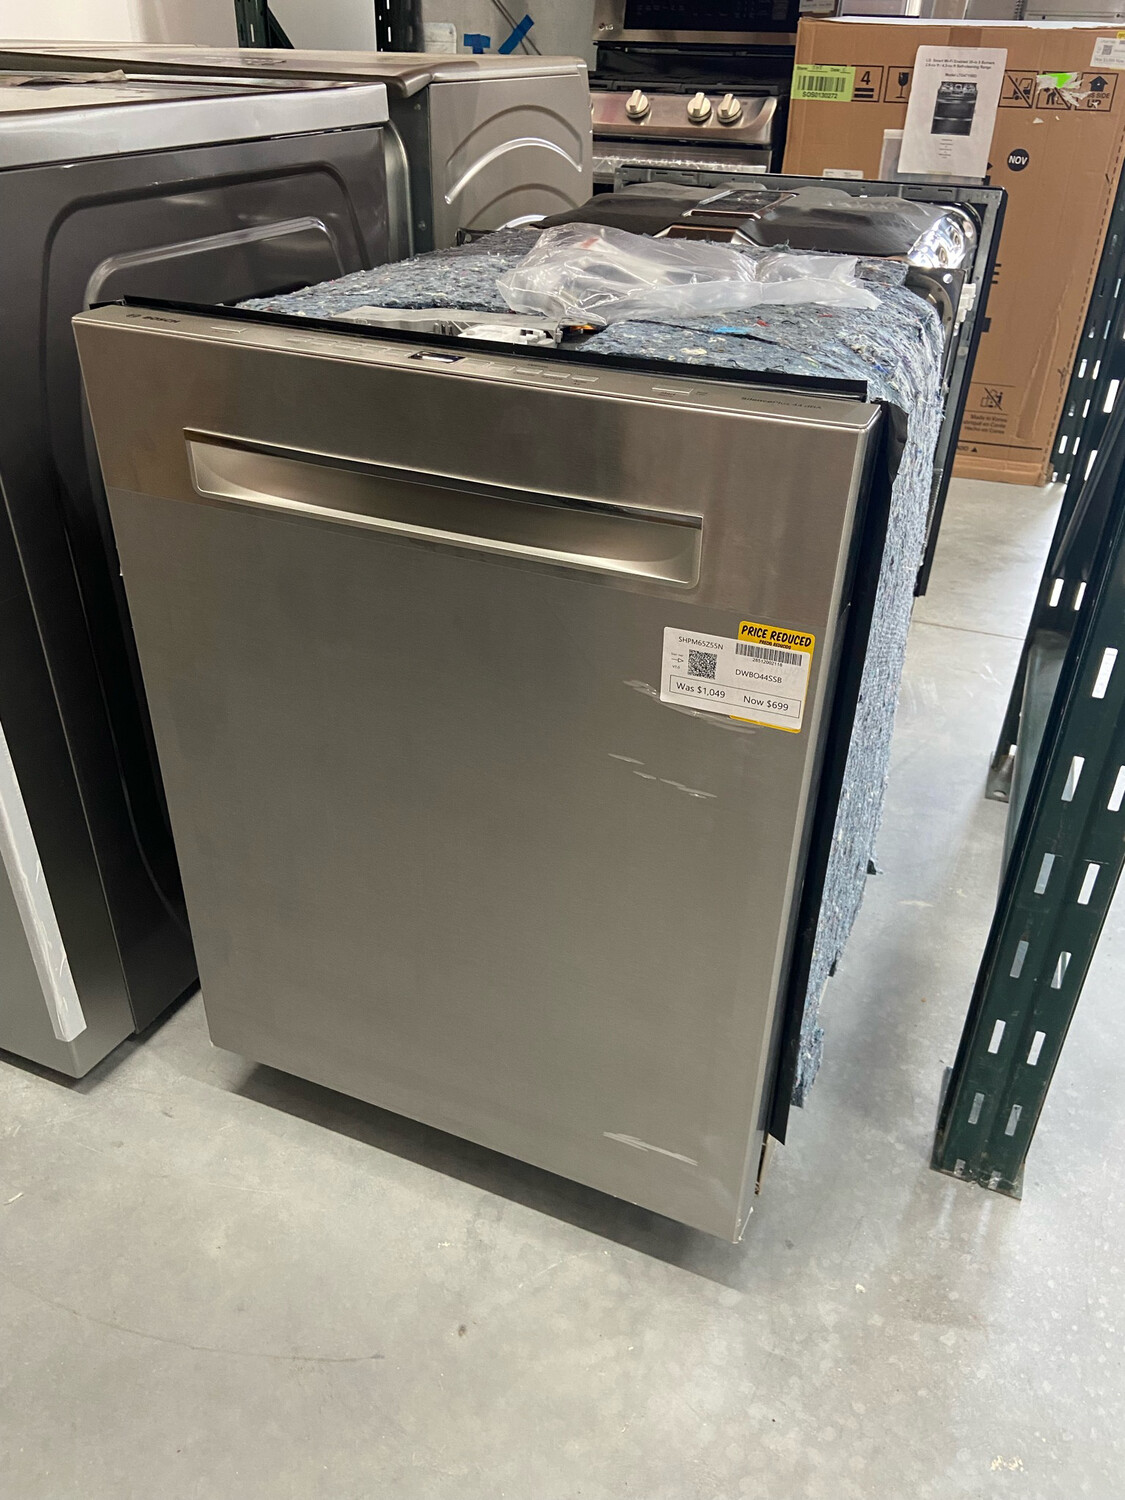 Bosch Dishwasher 500 Series AutoAir 44-Decibel Built-In Dishwasher (Stainless Steel) (Common: 24 Inch; Actual: 23.56-in) Model SHPM65Z55N MSRP $1049